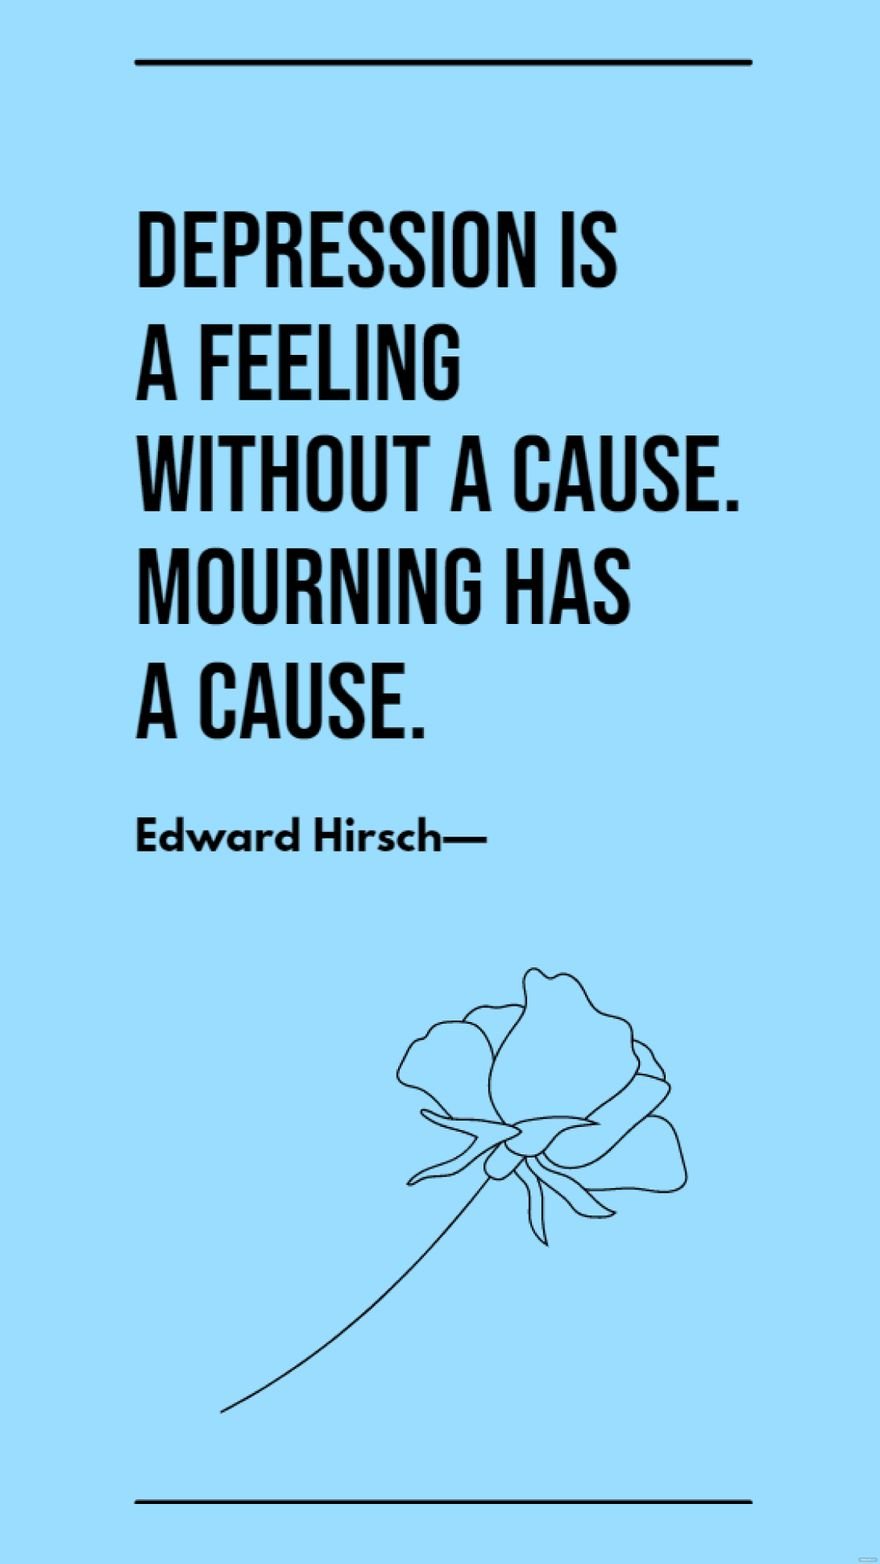 Edward Hirsch - Depression is a feeling without a cause. Mourning has a cause.